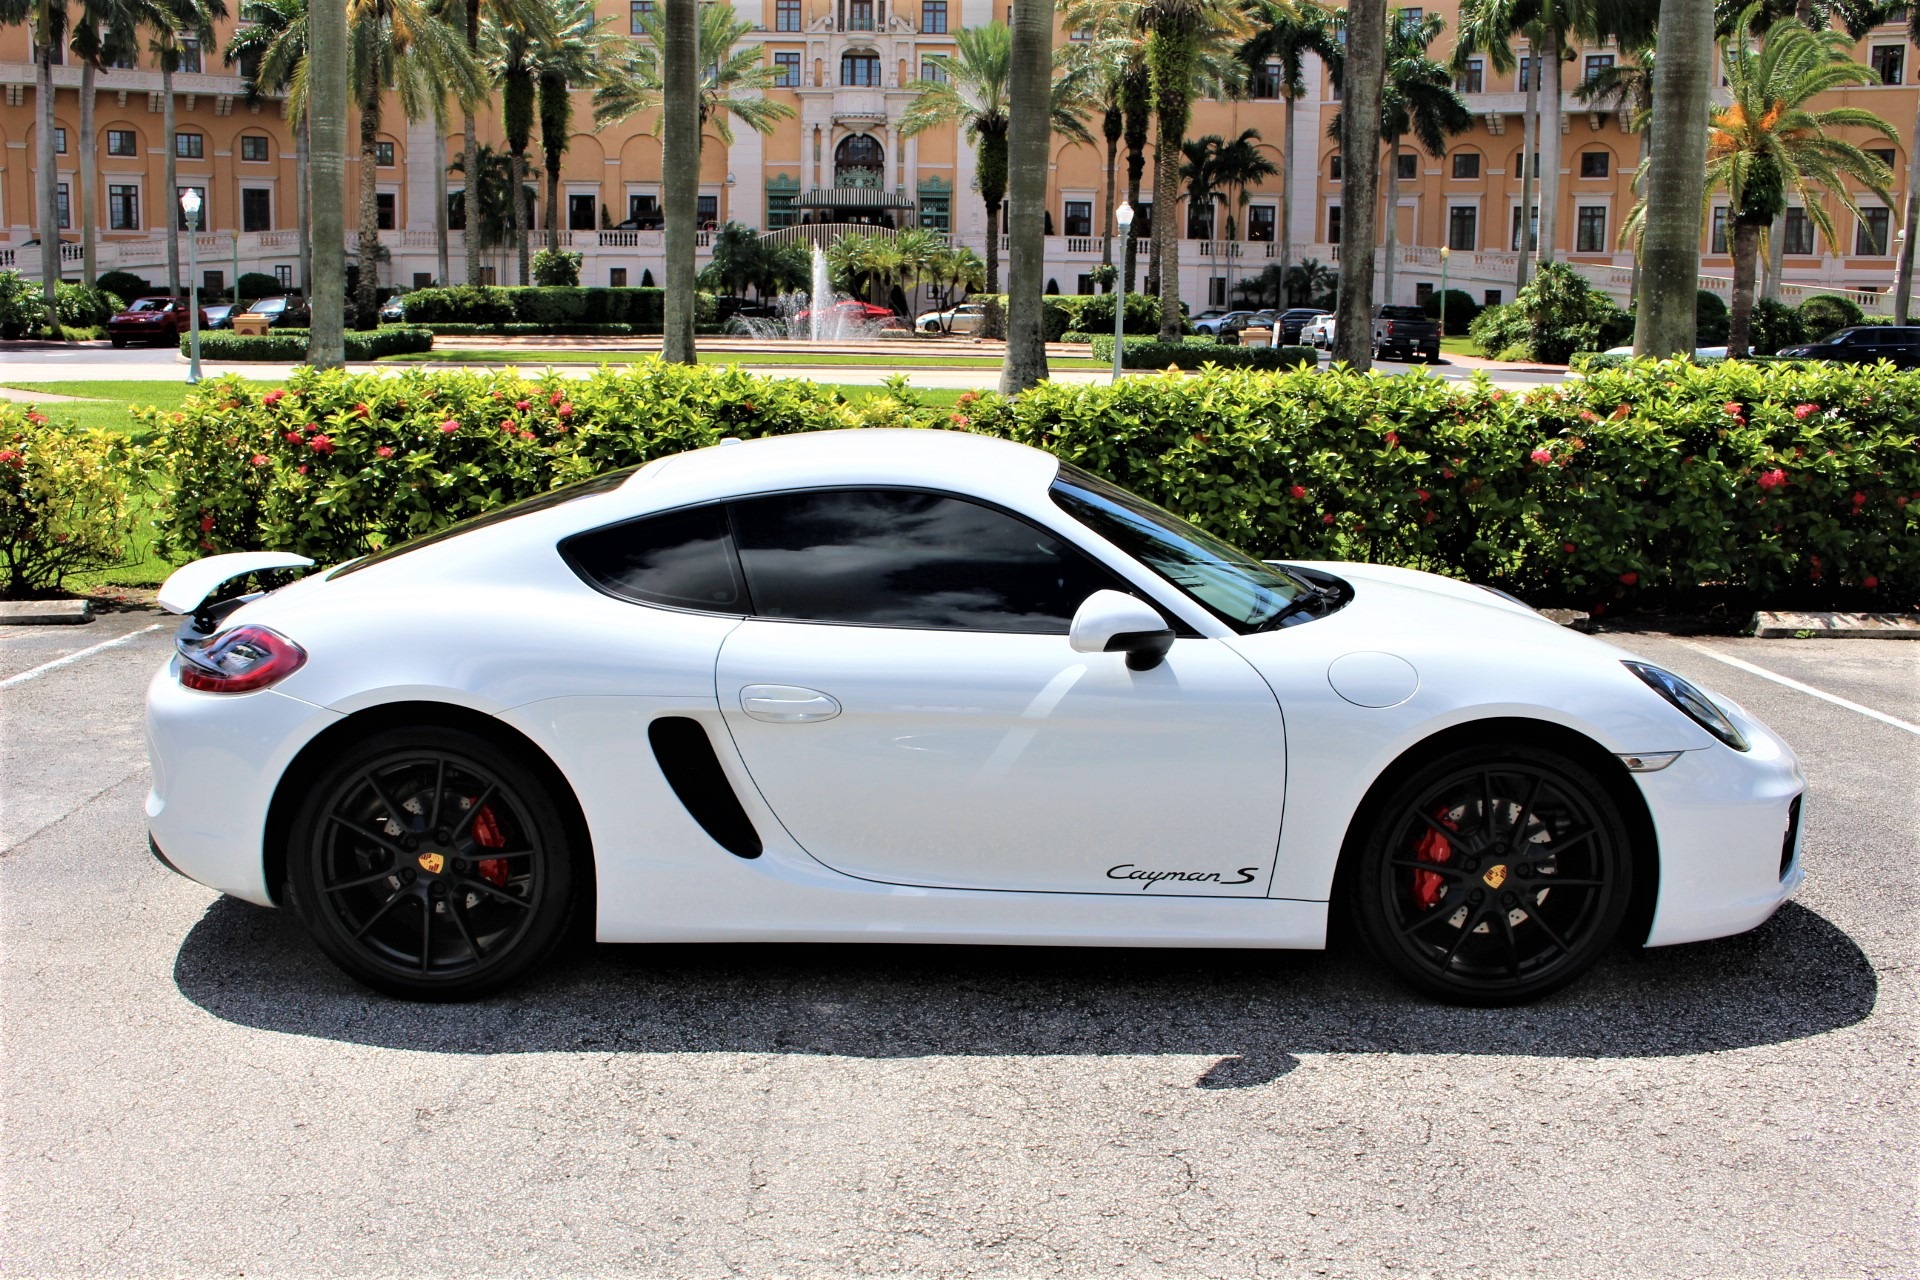 Used 2015 Porsche Cayman S for sale Sold at The Gables Sports Cars in Miami FL 33146 1